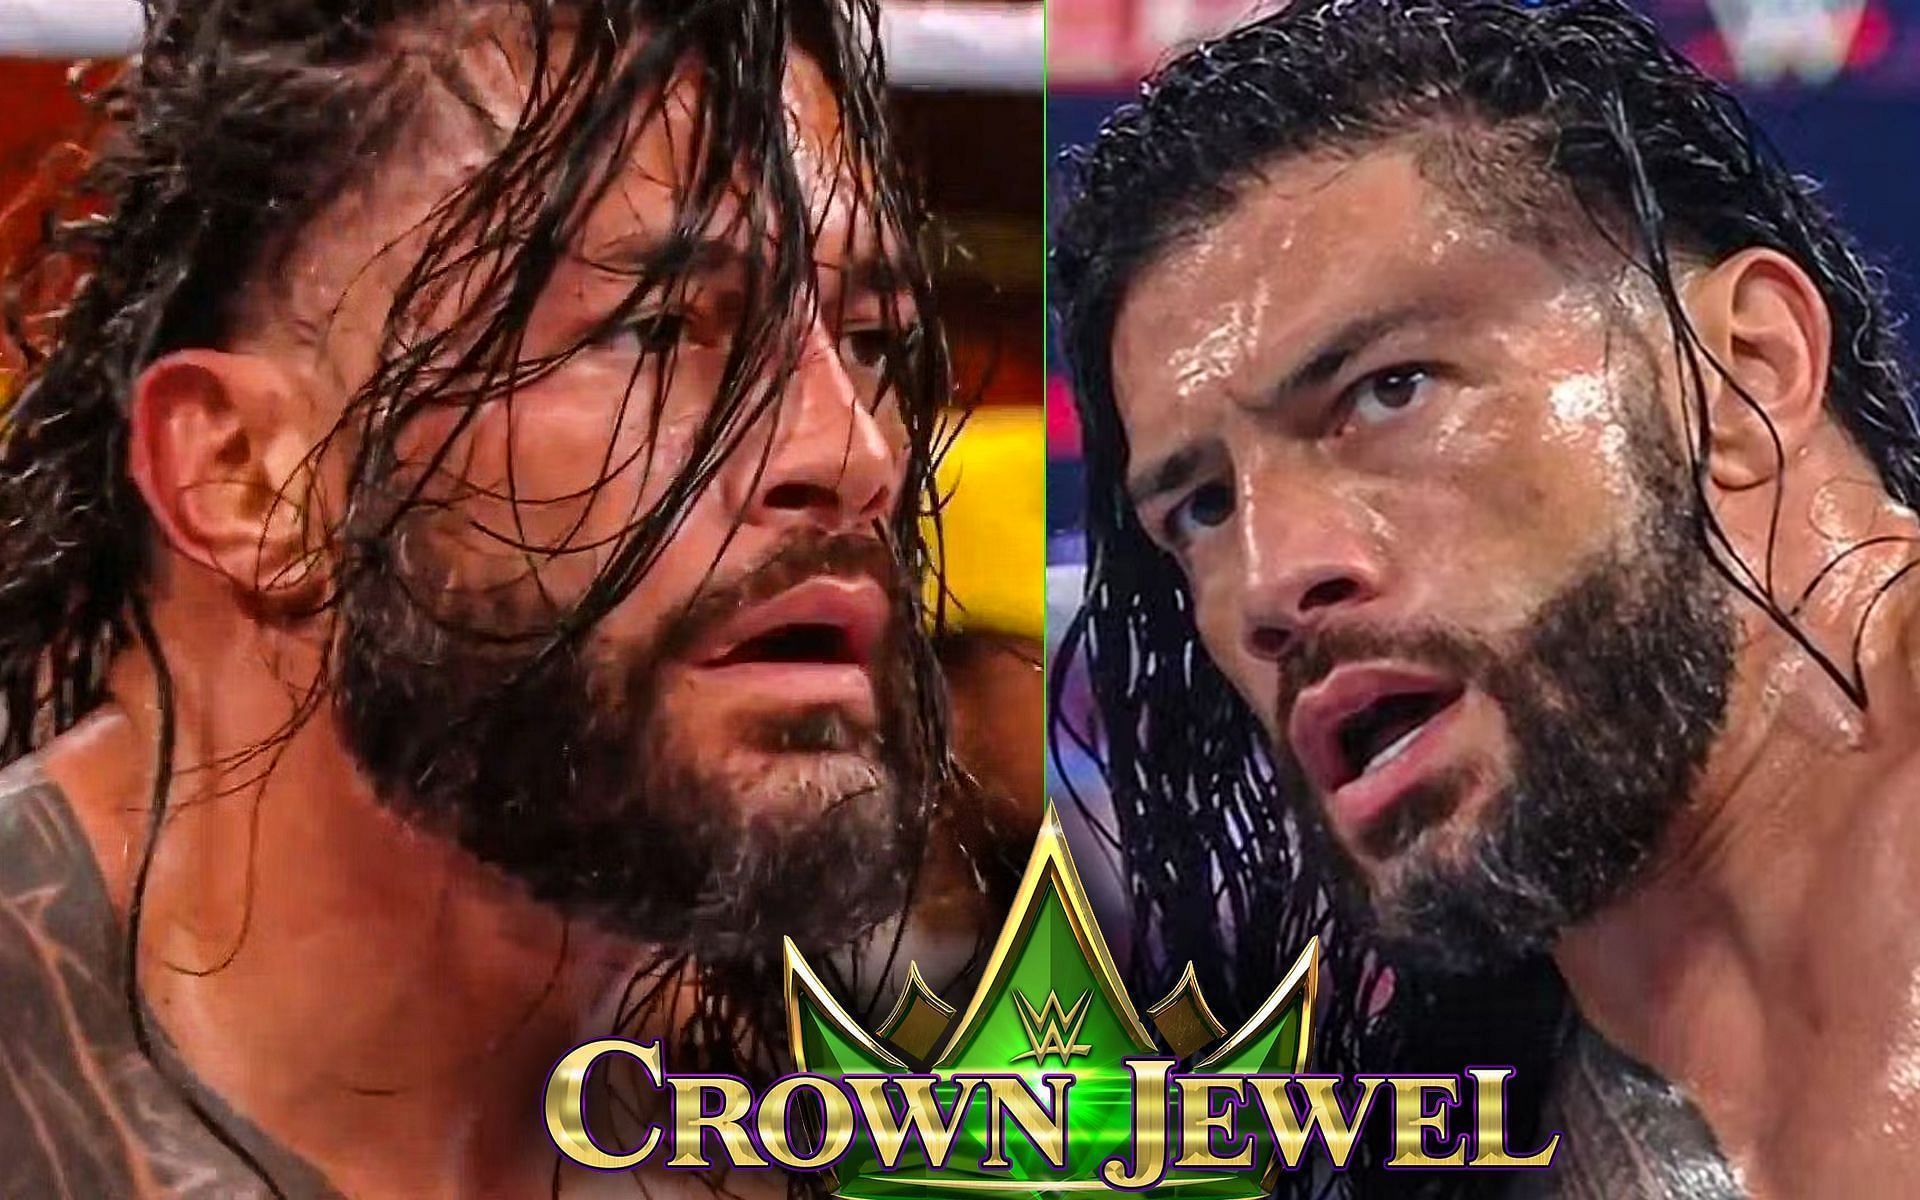 Roman Reigns to defend his title at Crown Jewel